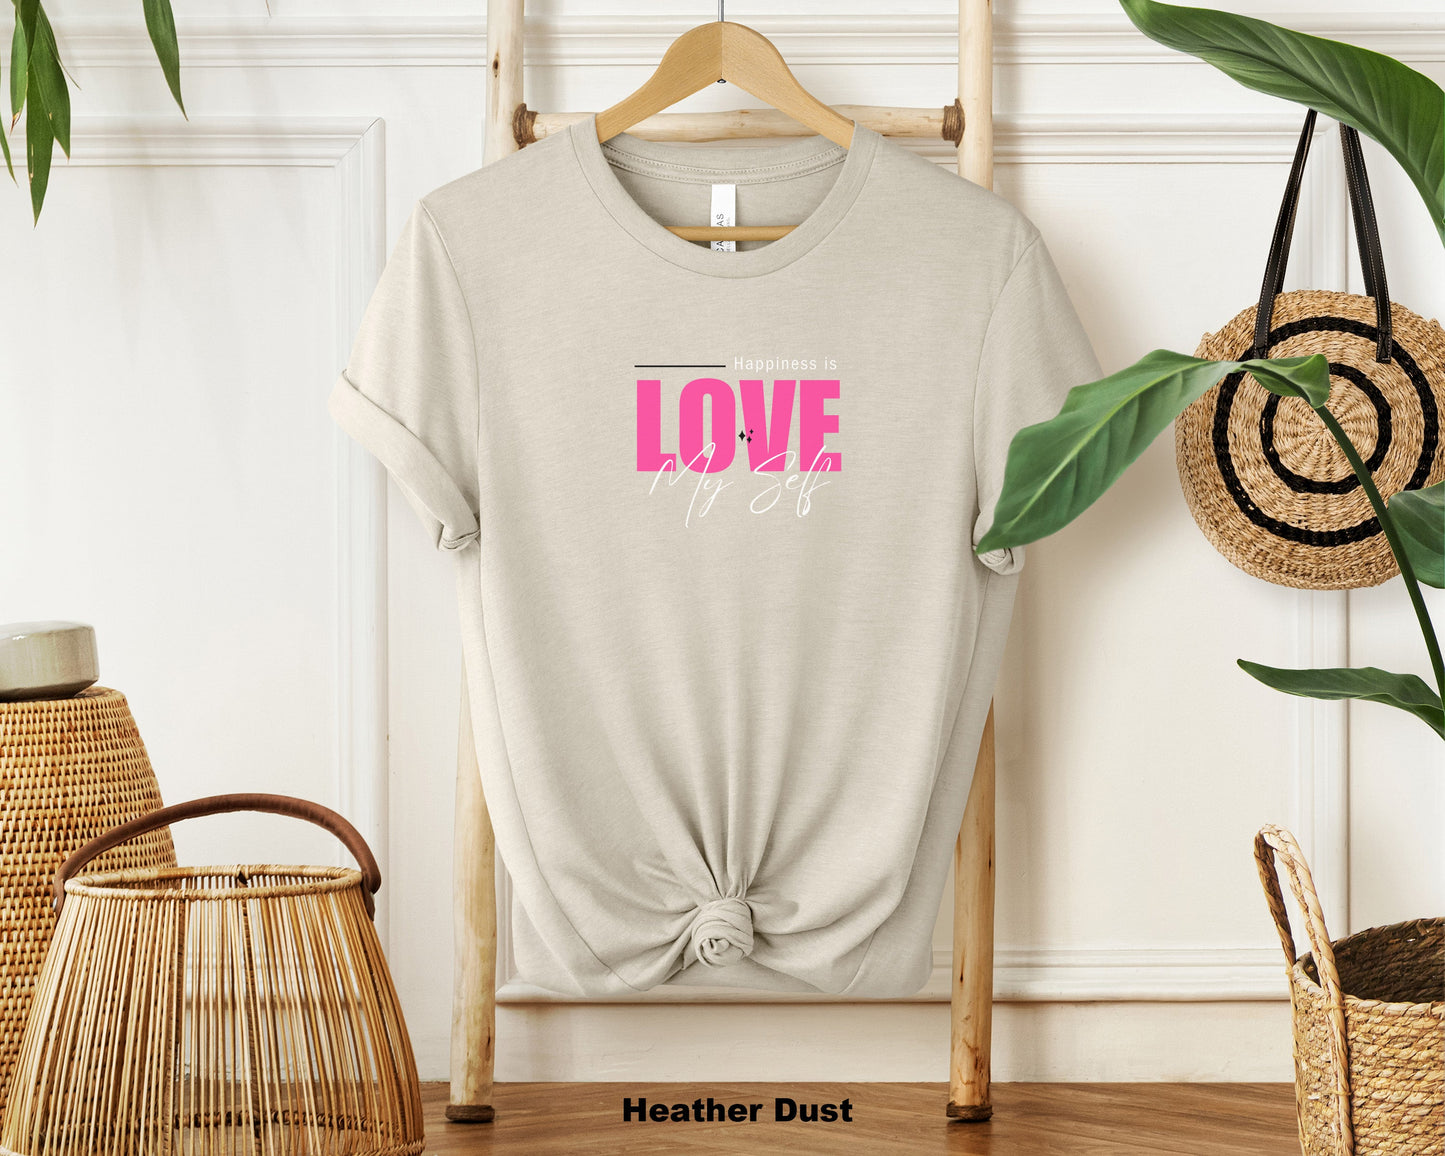 "Happiness Is Loving Myself" Inspirational Quote Classic Unisex T-Shirt in Soft Cotton - Motivational Tee for Self-Love Advocates